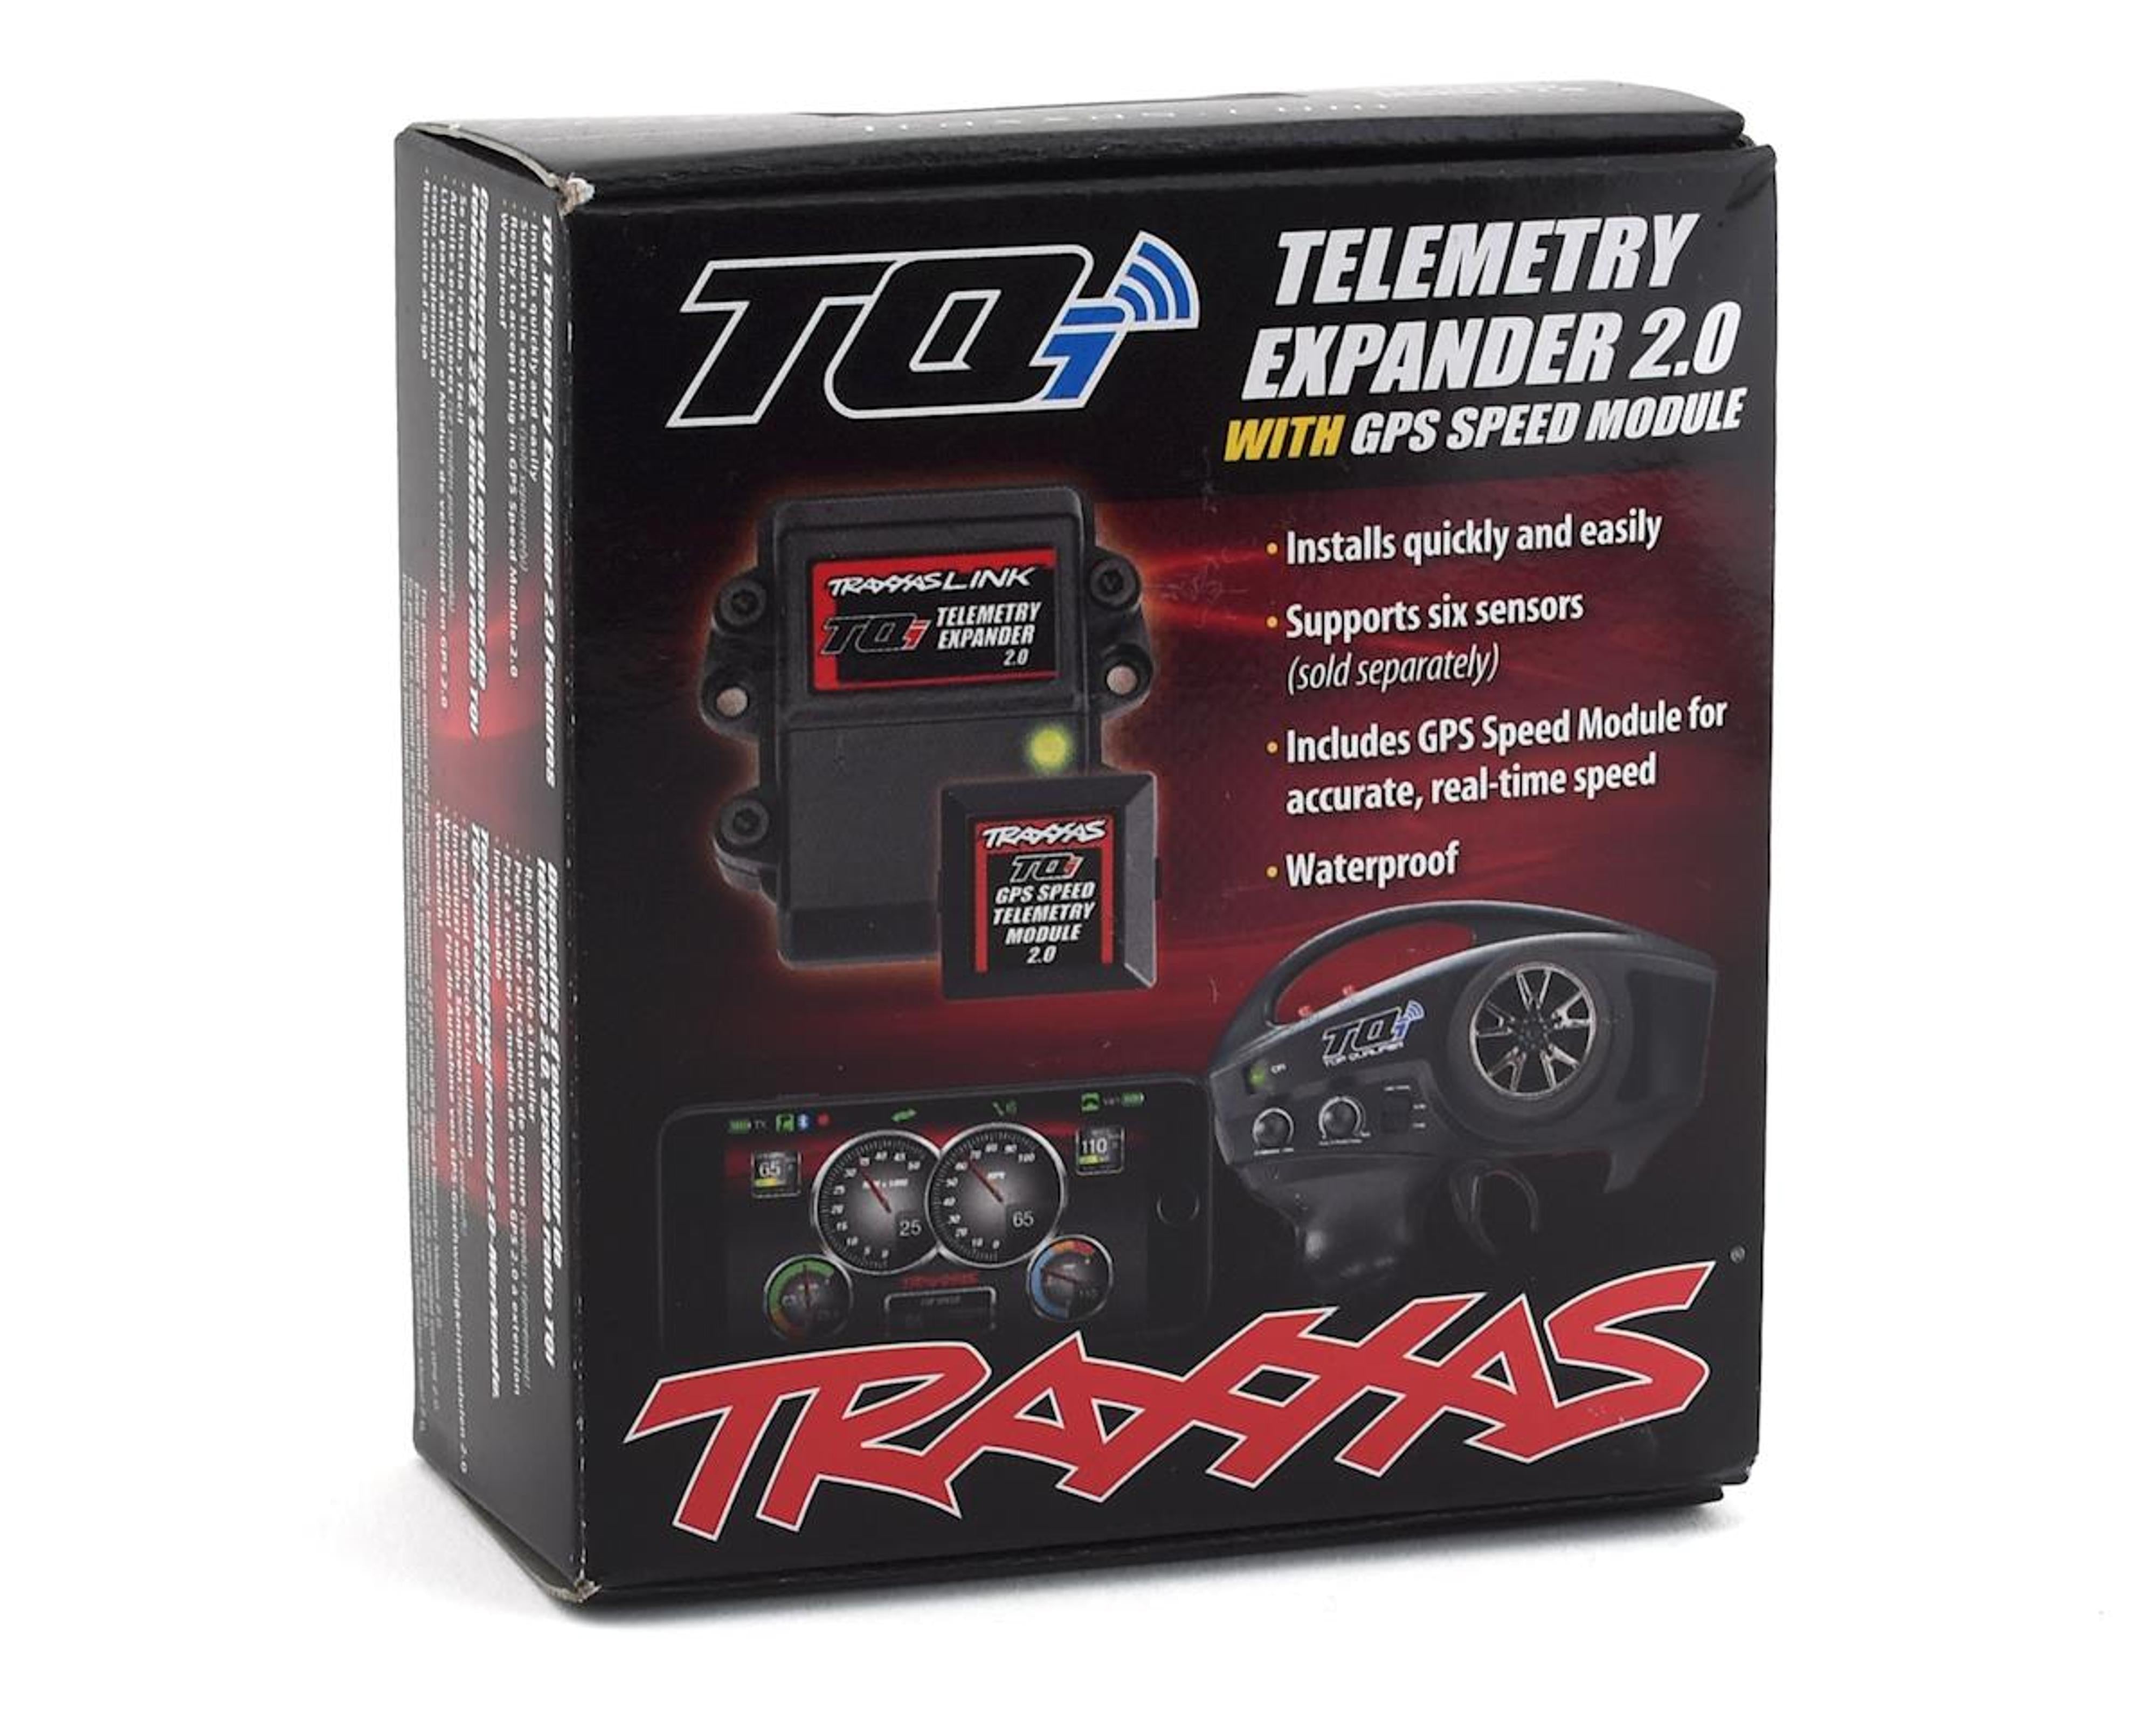 TRAXXAS 6553X Telemetry expander 2.0 and GPS module 2.0, TQi radio system